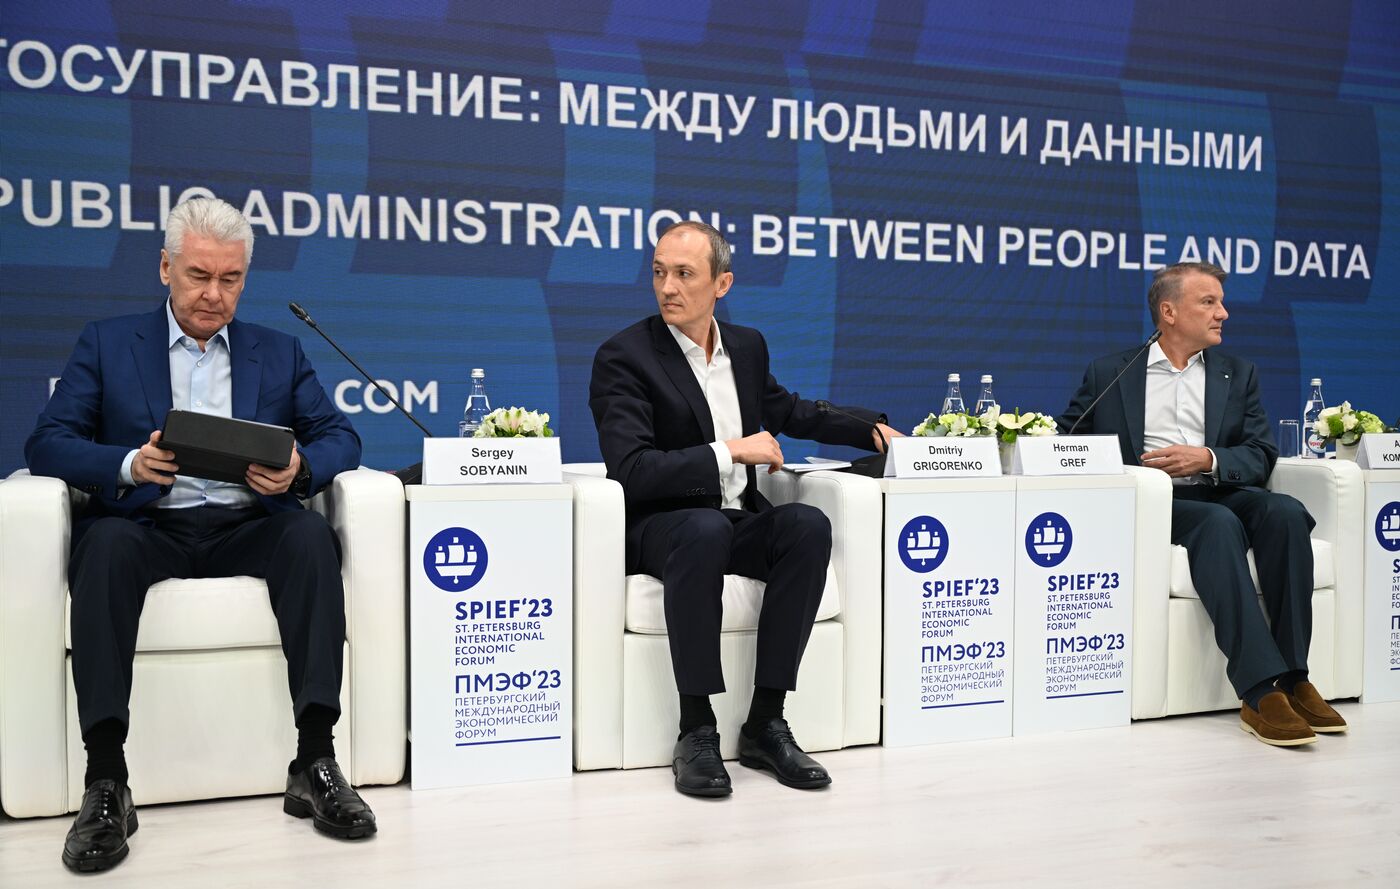 SPIEF-2023. Public Administration: Between People and Data